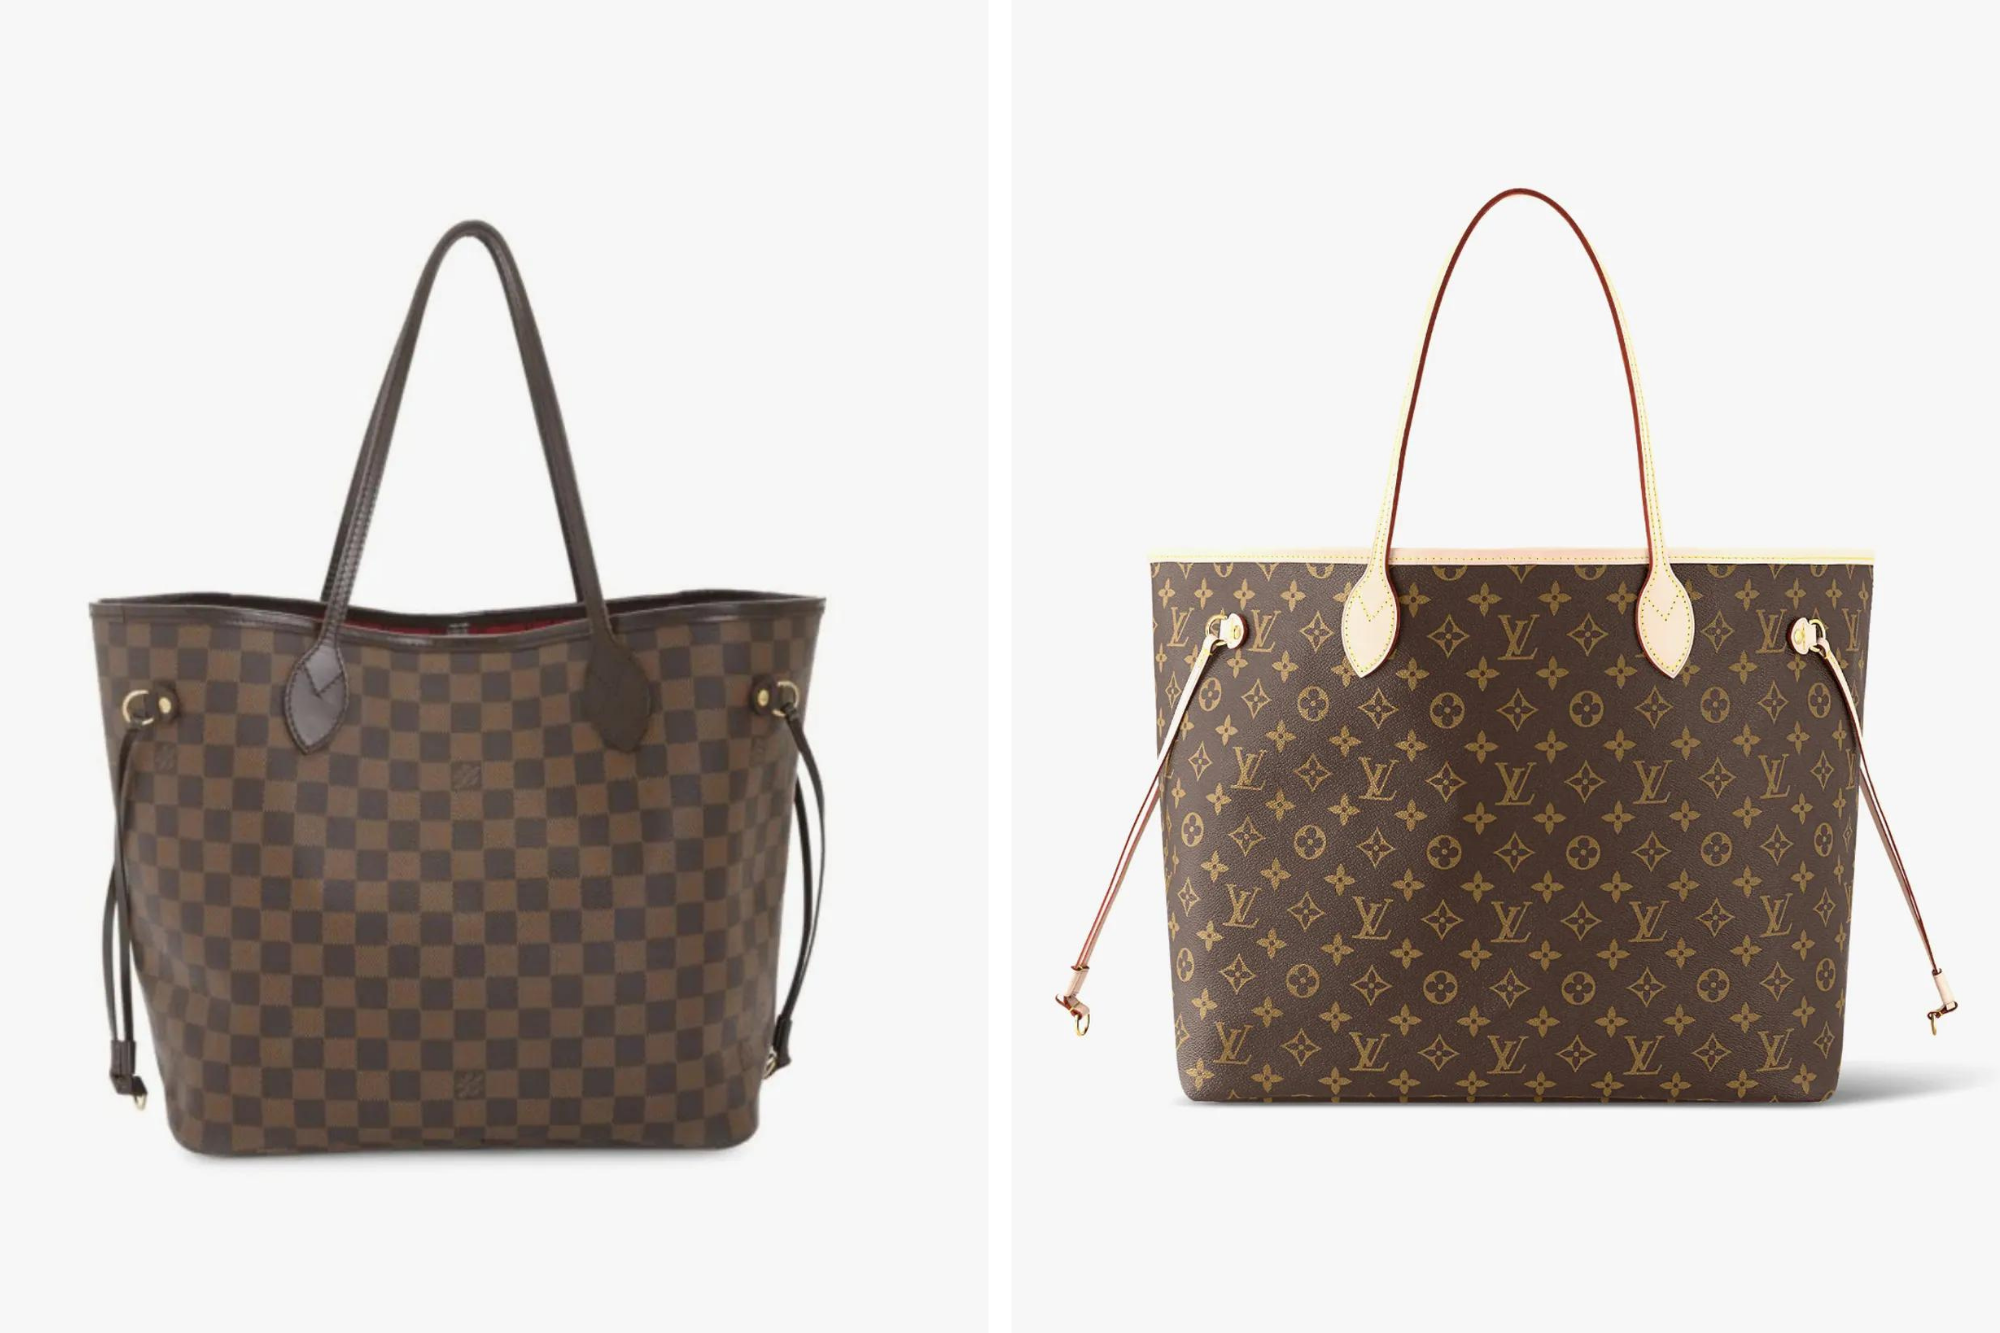 Resale value of Gucci, Chanel, Louis Vuitton handbags is falling